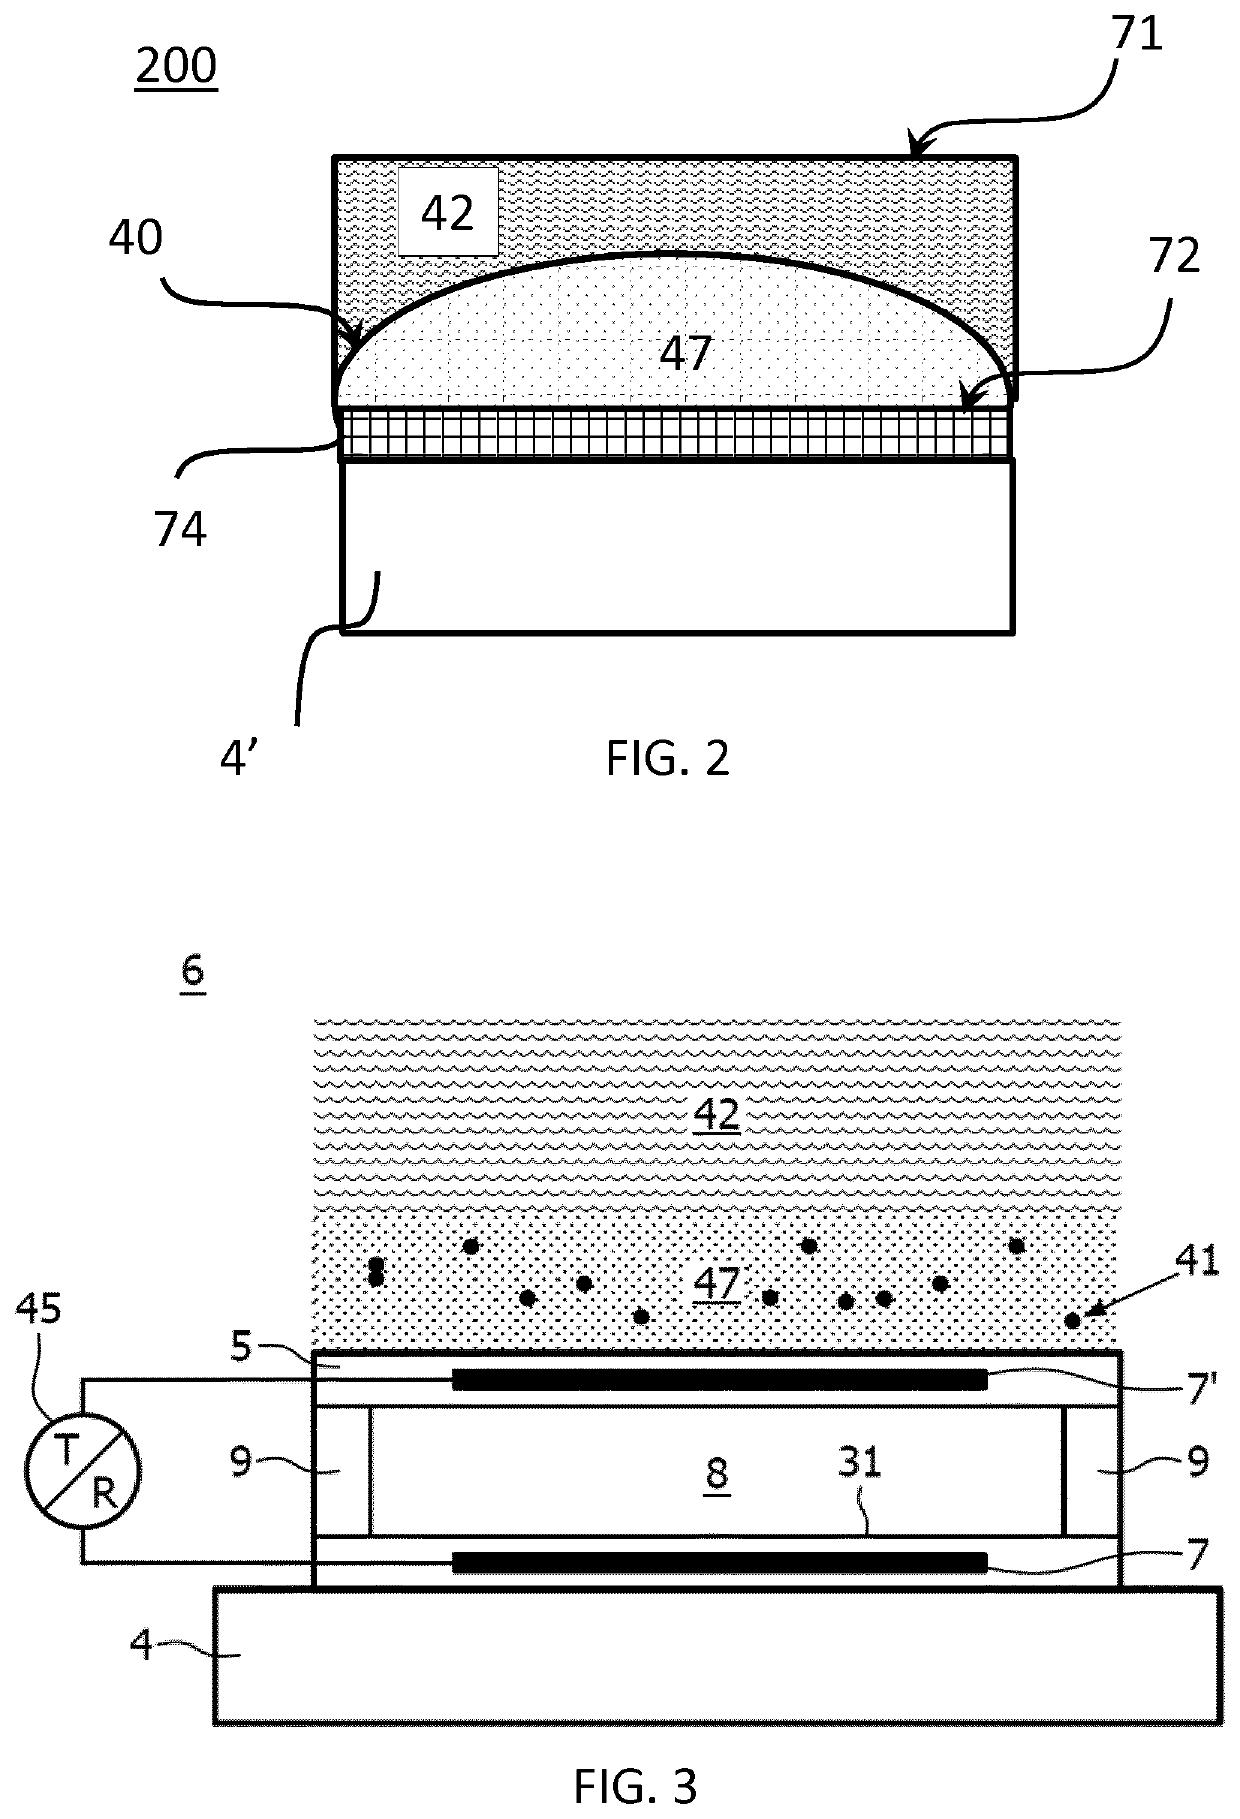 Acoustic lens for an ultrasound array